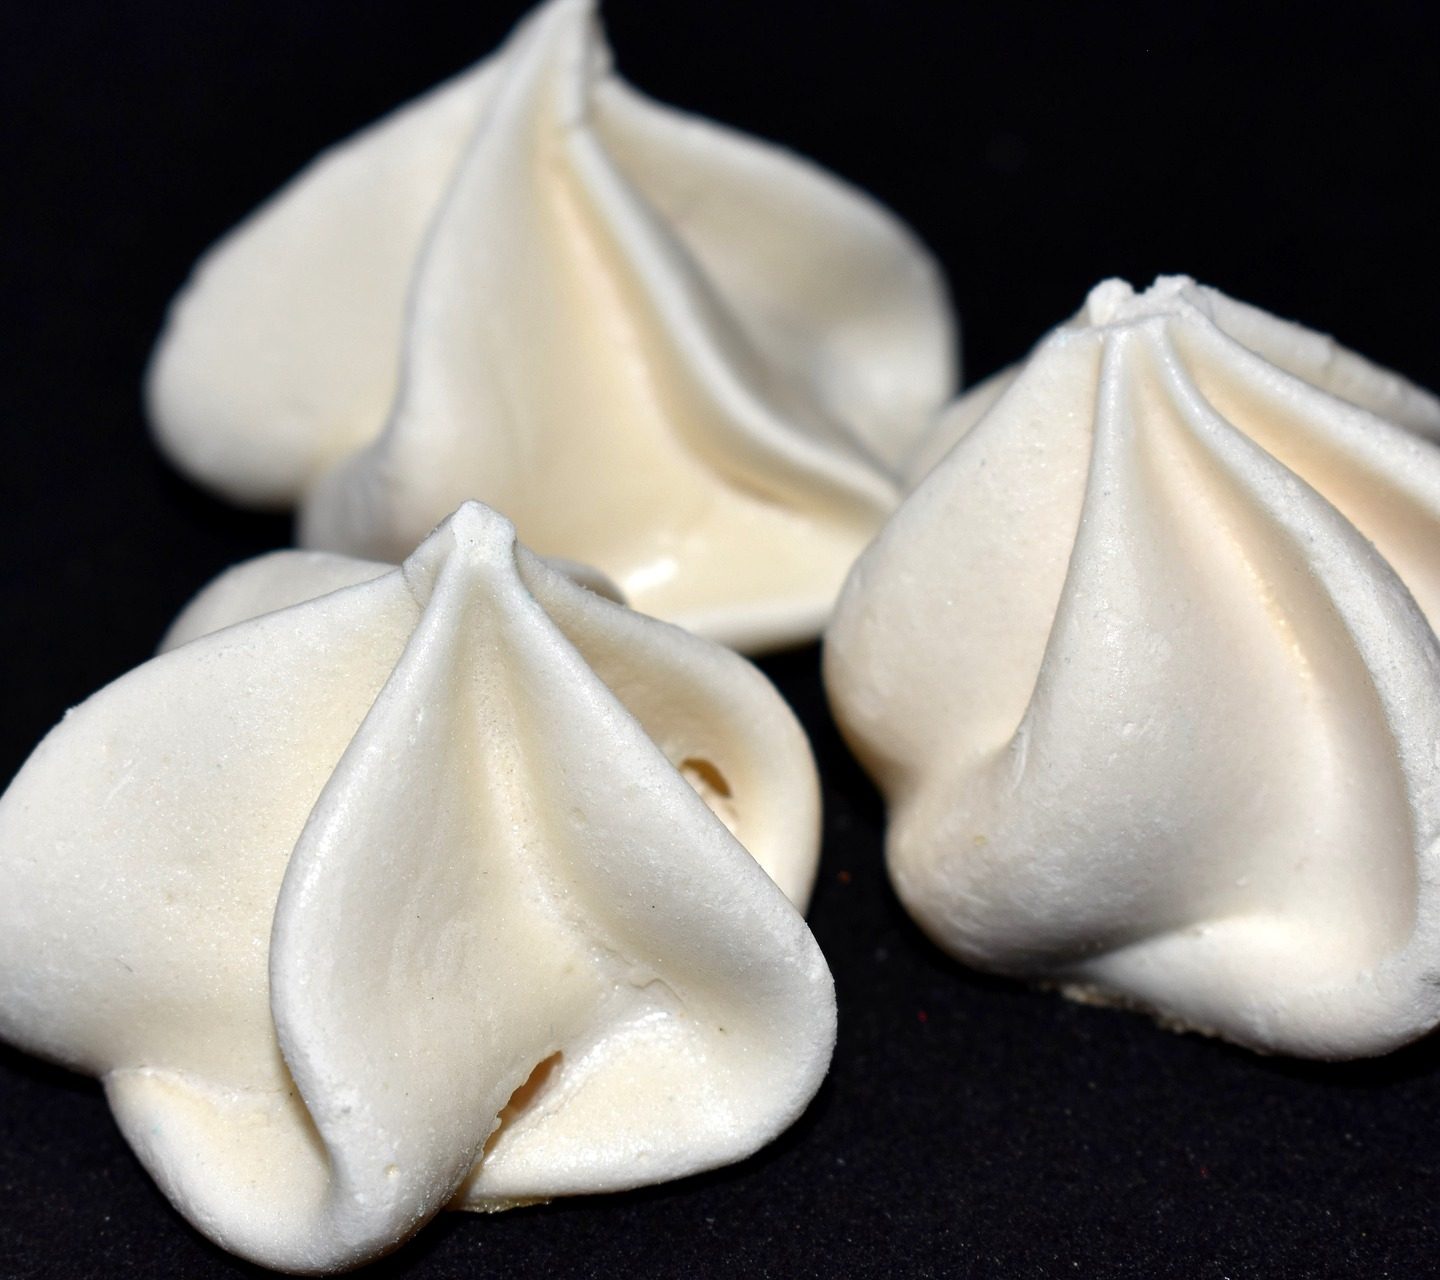 How to Make the Perfect Meringue